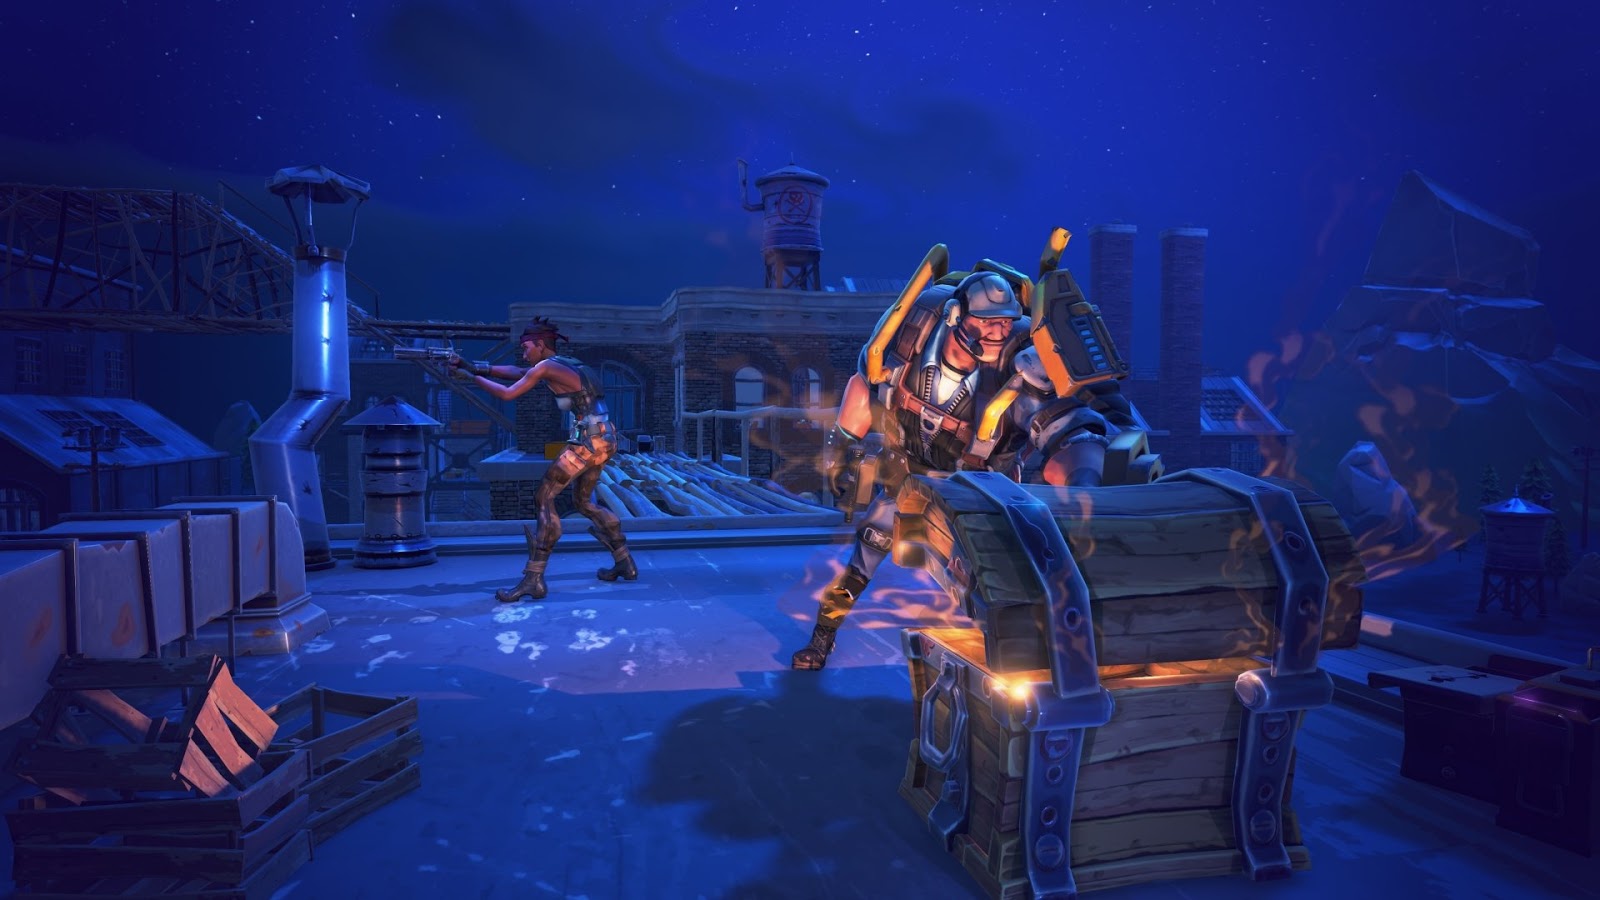 Download Fortnite HD Wallpapers  Read games reviews, play online games \u0026 download games wallpapers